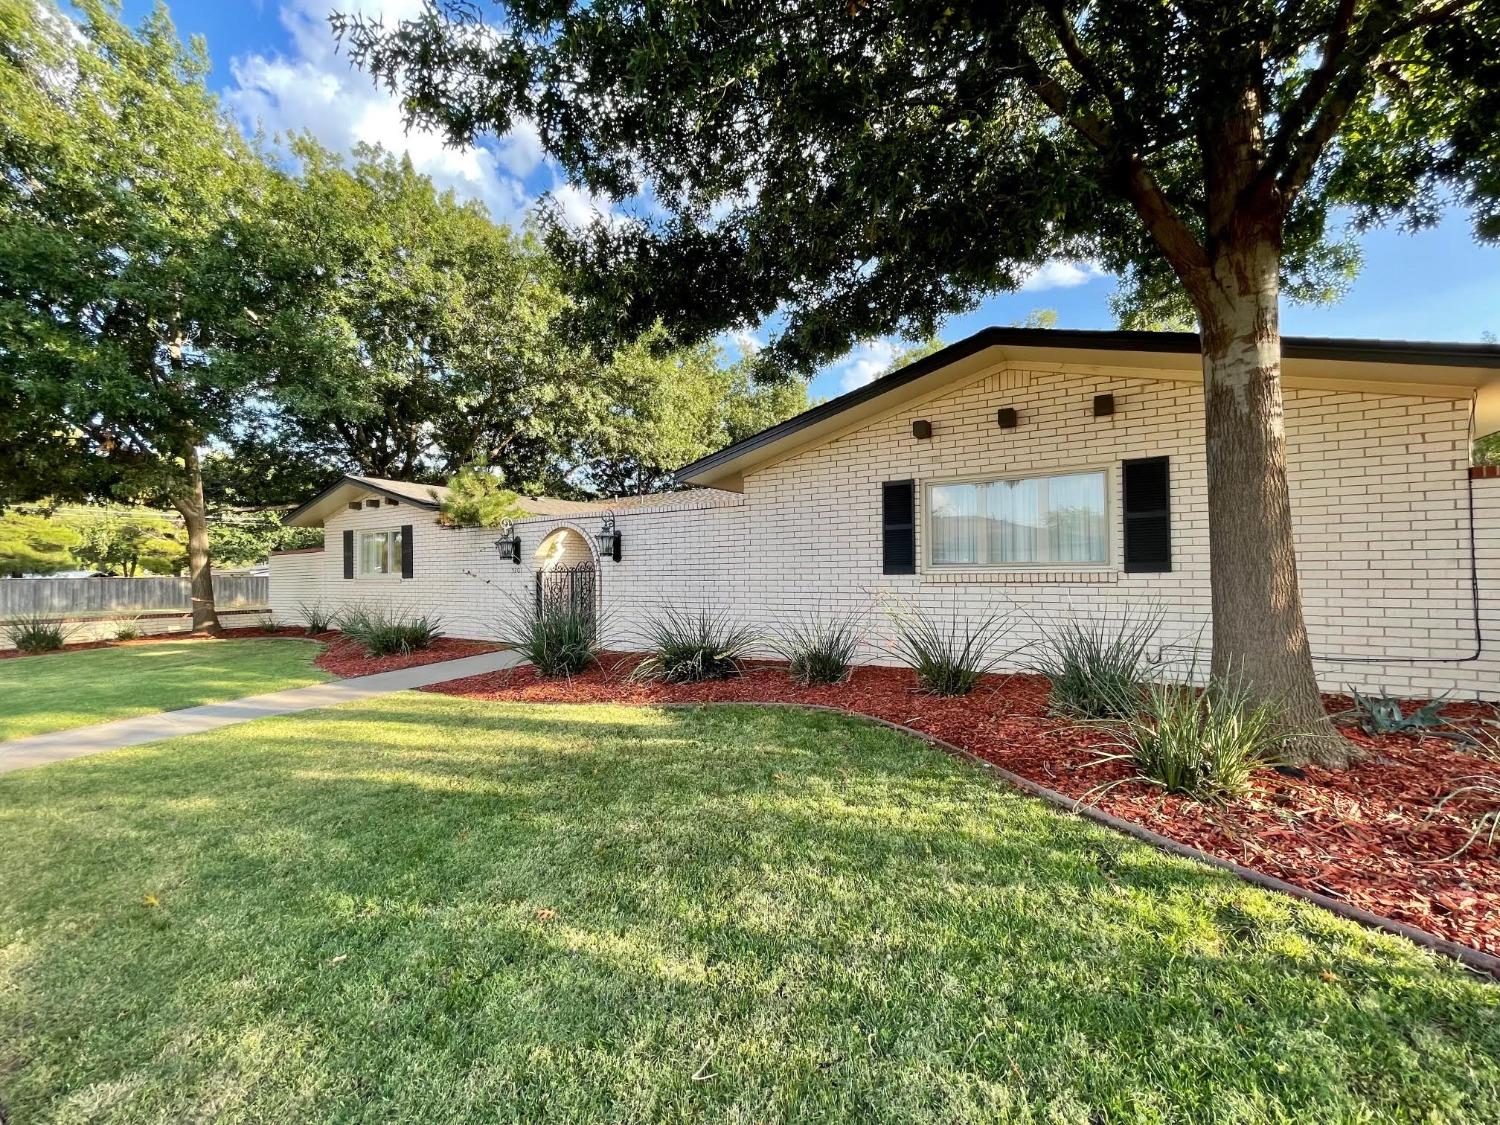 Immaculate home located in premier Lubbock location near hospitals, LCU and Texas Tech! Great floorplan, high ceilings, many updates, lots of natural light and so much more. This 3 bedroom, 2 bathroom home with a 2 car rear entry garage is move in ready for new owners!